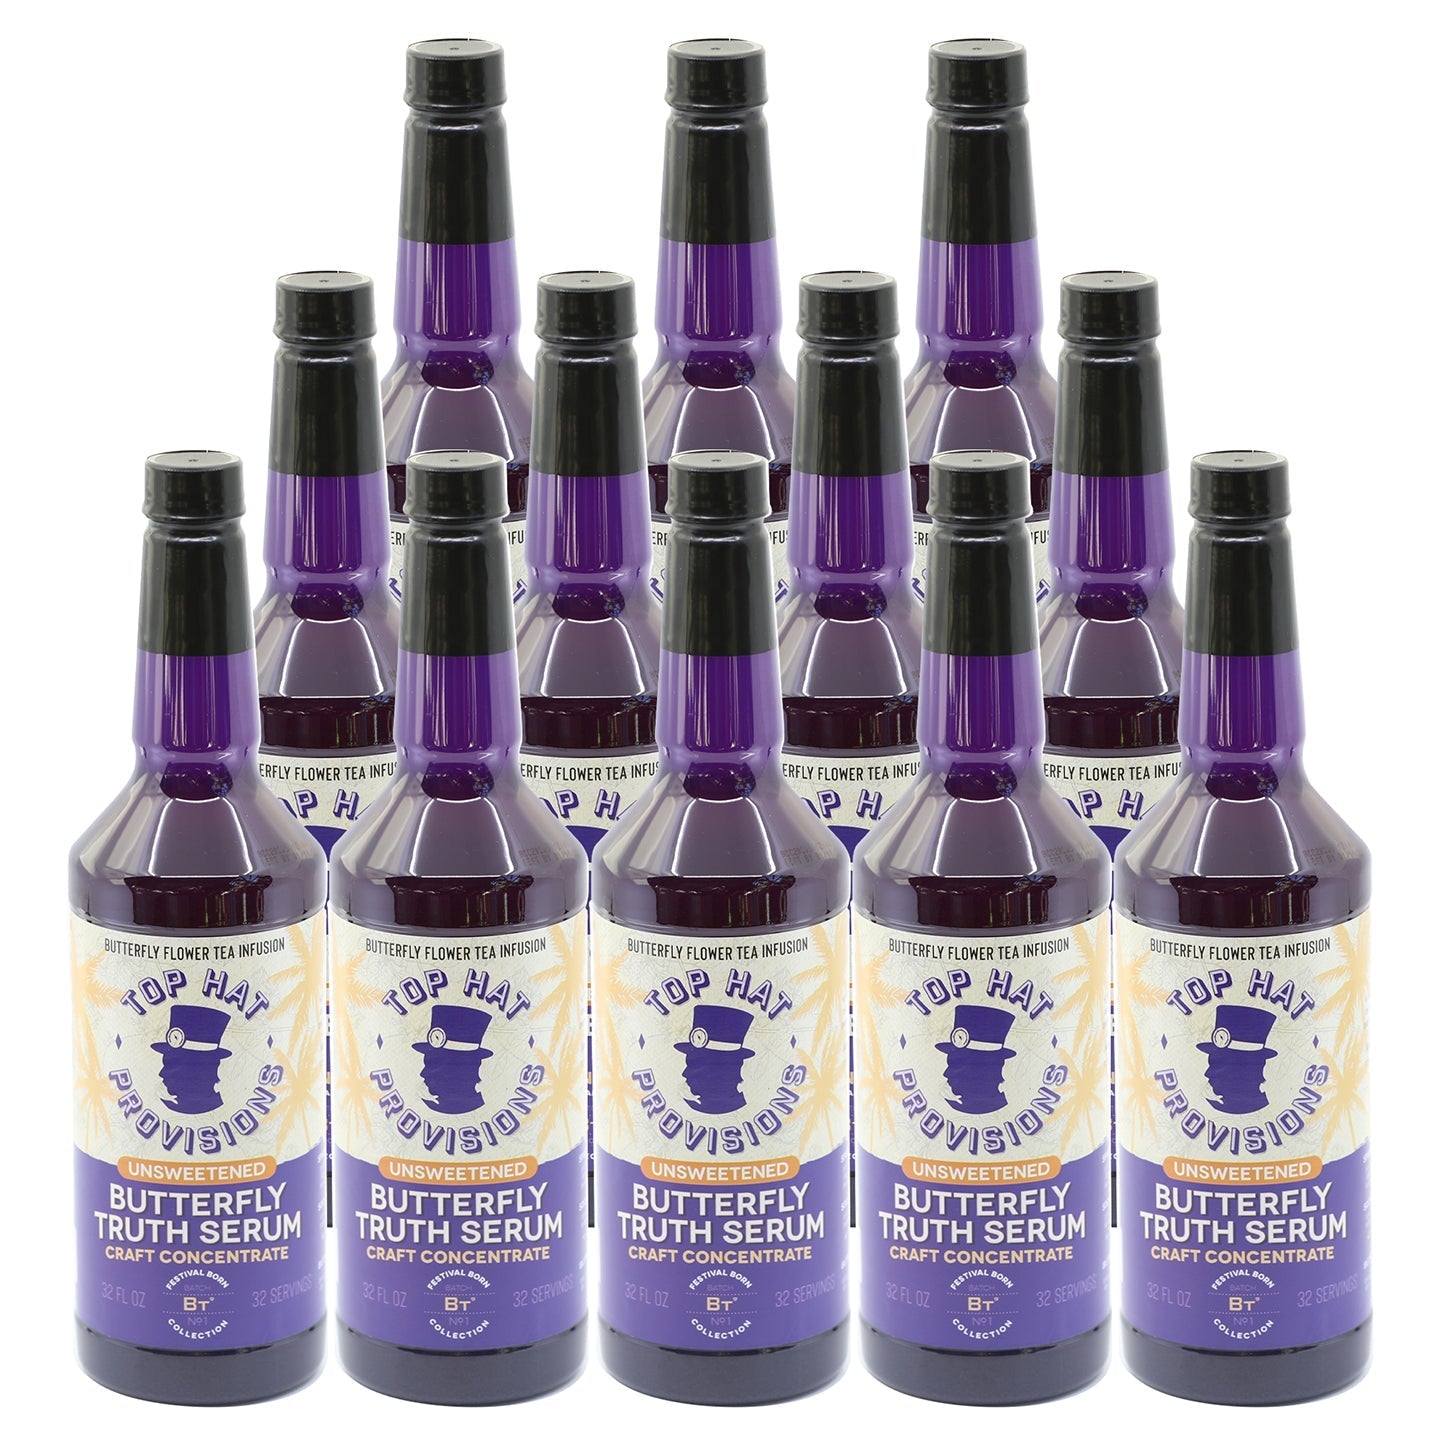 Top Hat Butterfly Truth Serum - Butterfly Pea Floral Extract - Blue Flower Tea Tincture - Alcohol Free Butterfly Pea Bitters - Unsweetened - Non-Alcoholic - Make Drinks Natural Blue and Indigo Purple - Single 32oz Bottle - Groove Rabbit